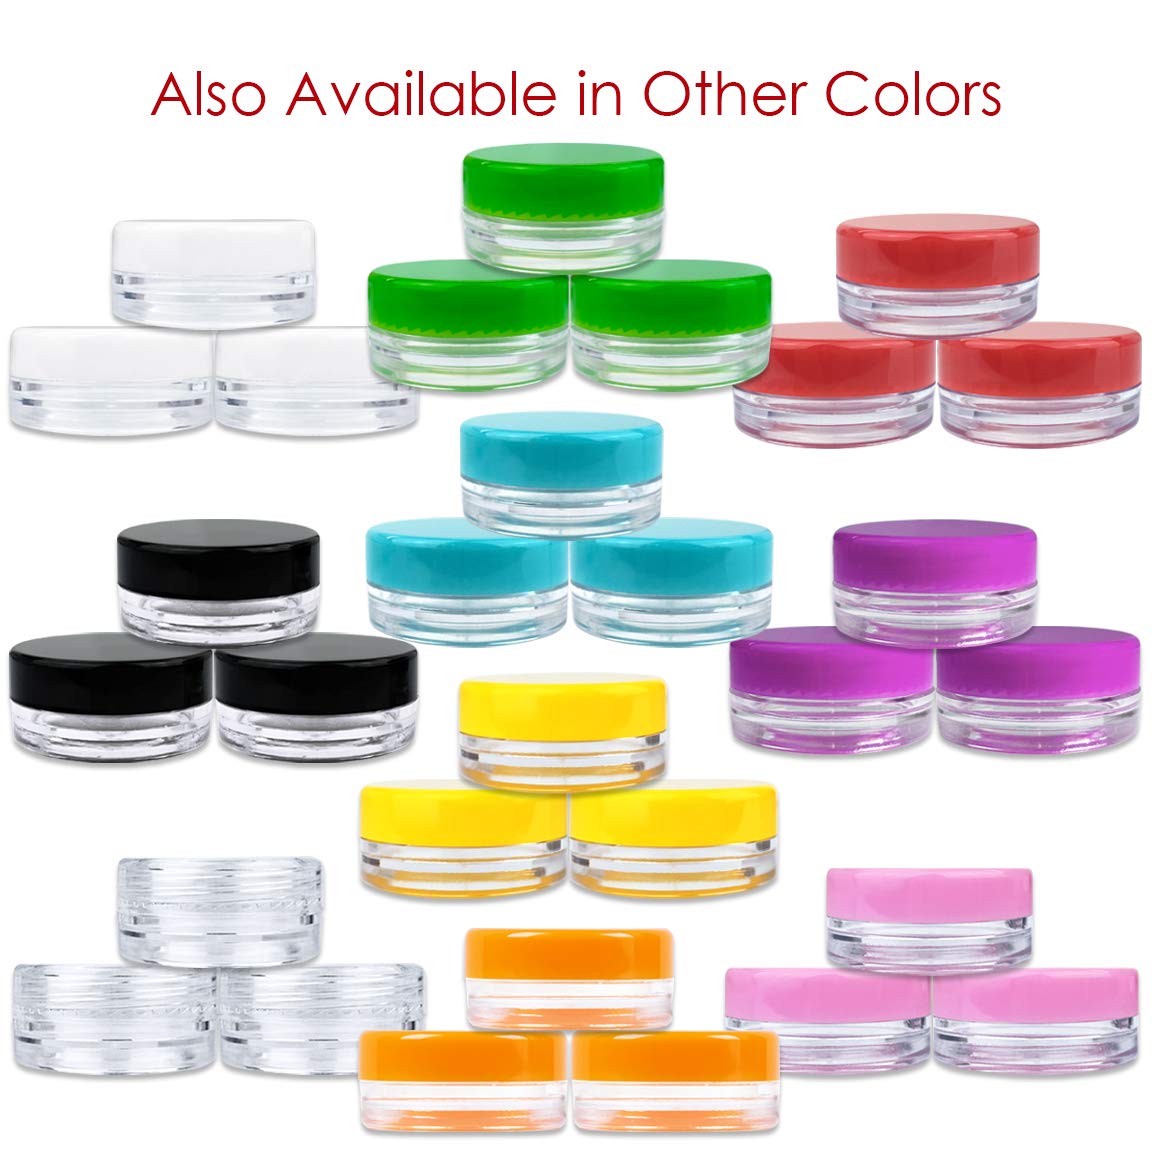 Beauticom (Quantity: 200 Pcs) 3G/3ML Round Clear Jars with White Lids for Small Jewelry, Holding/Mixing Paints, Art Accessories and Other Craft Supplies - BPA Free